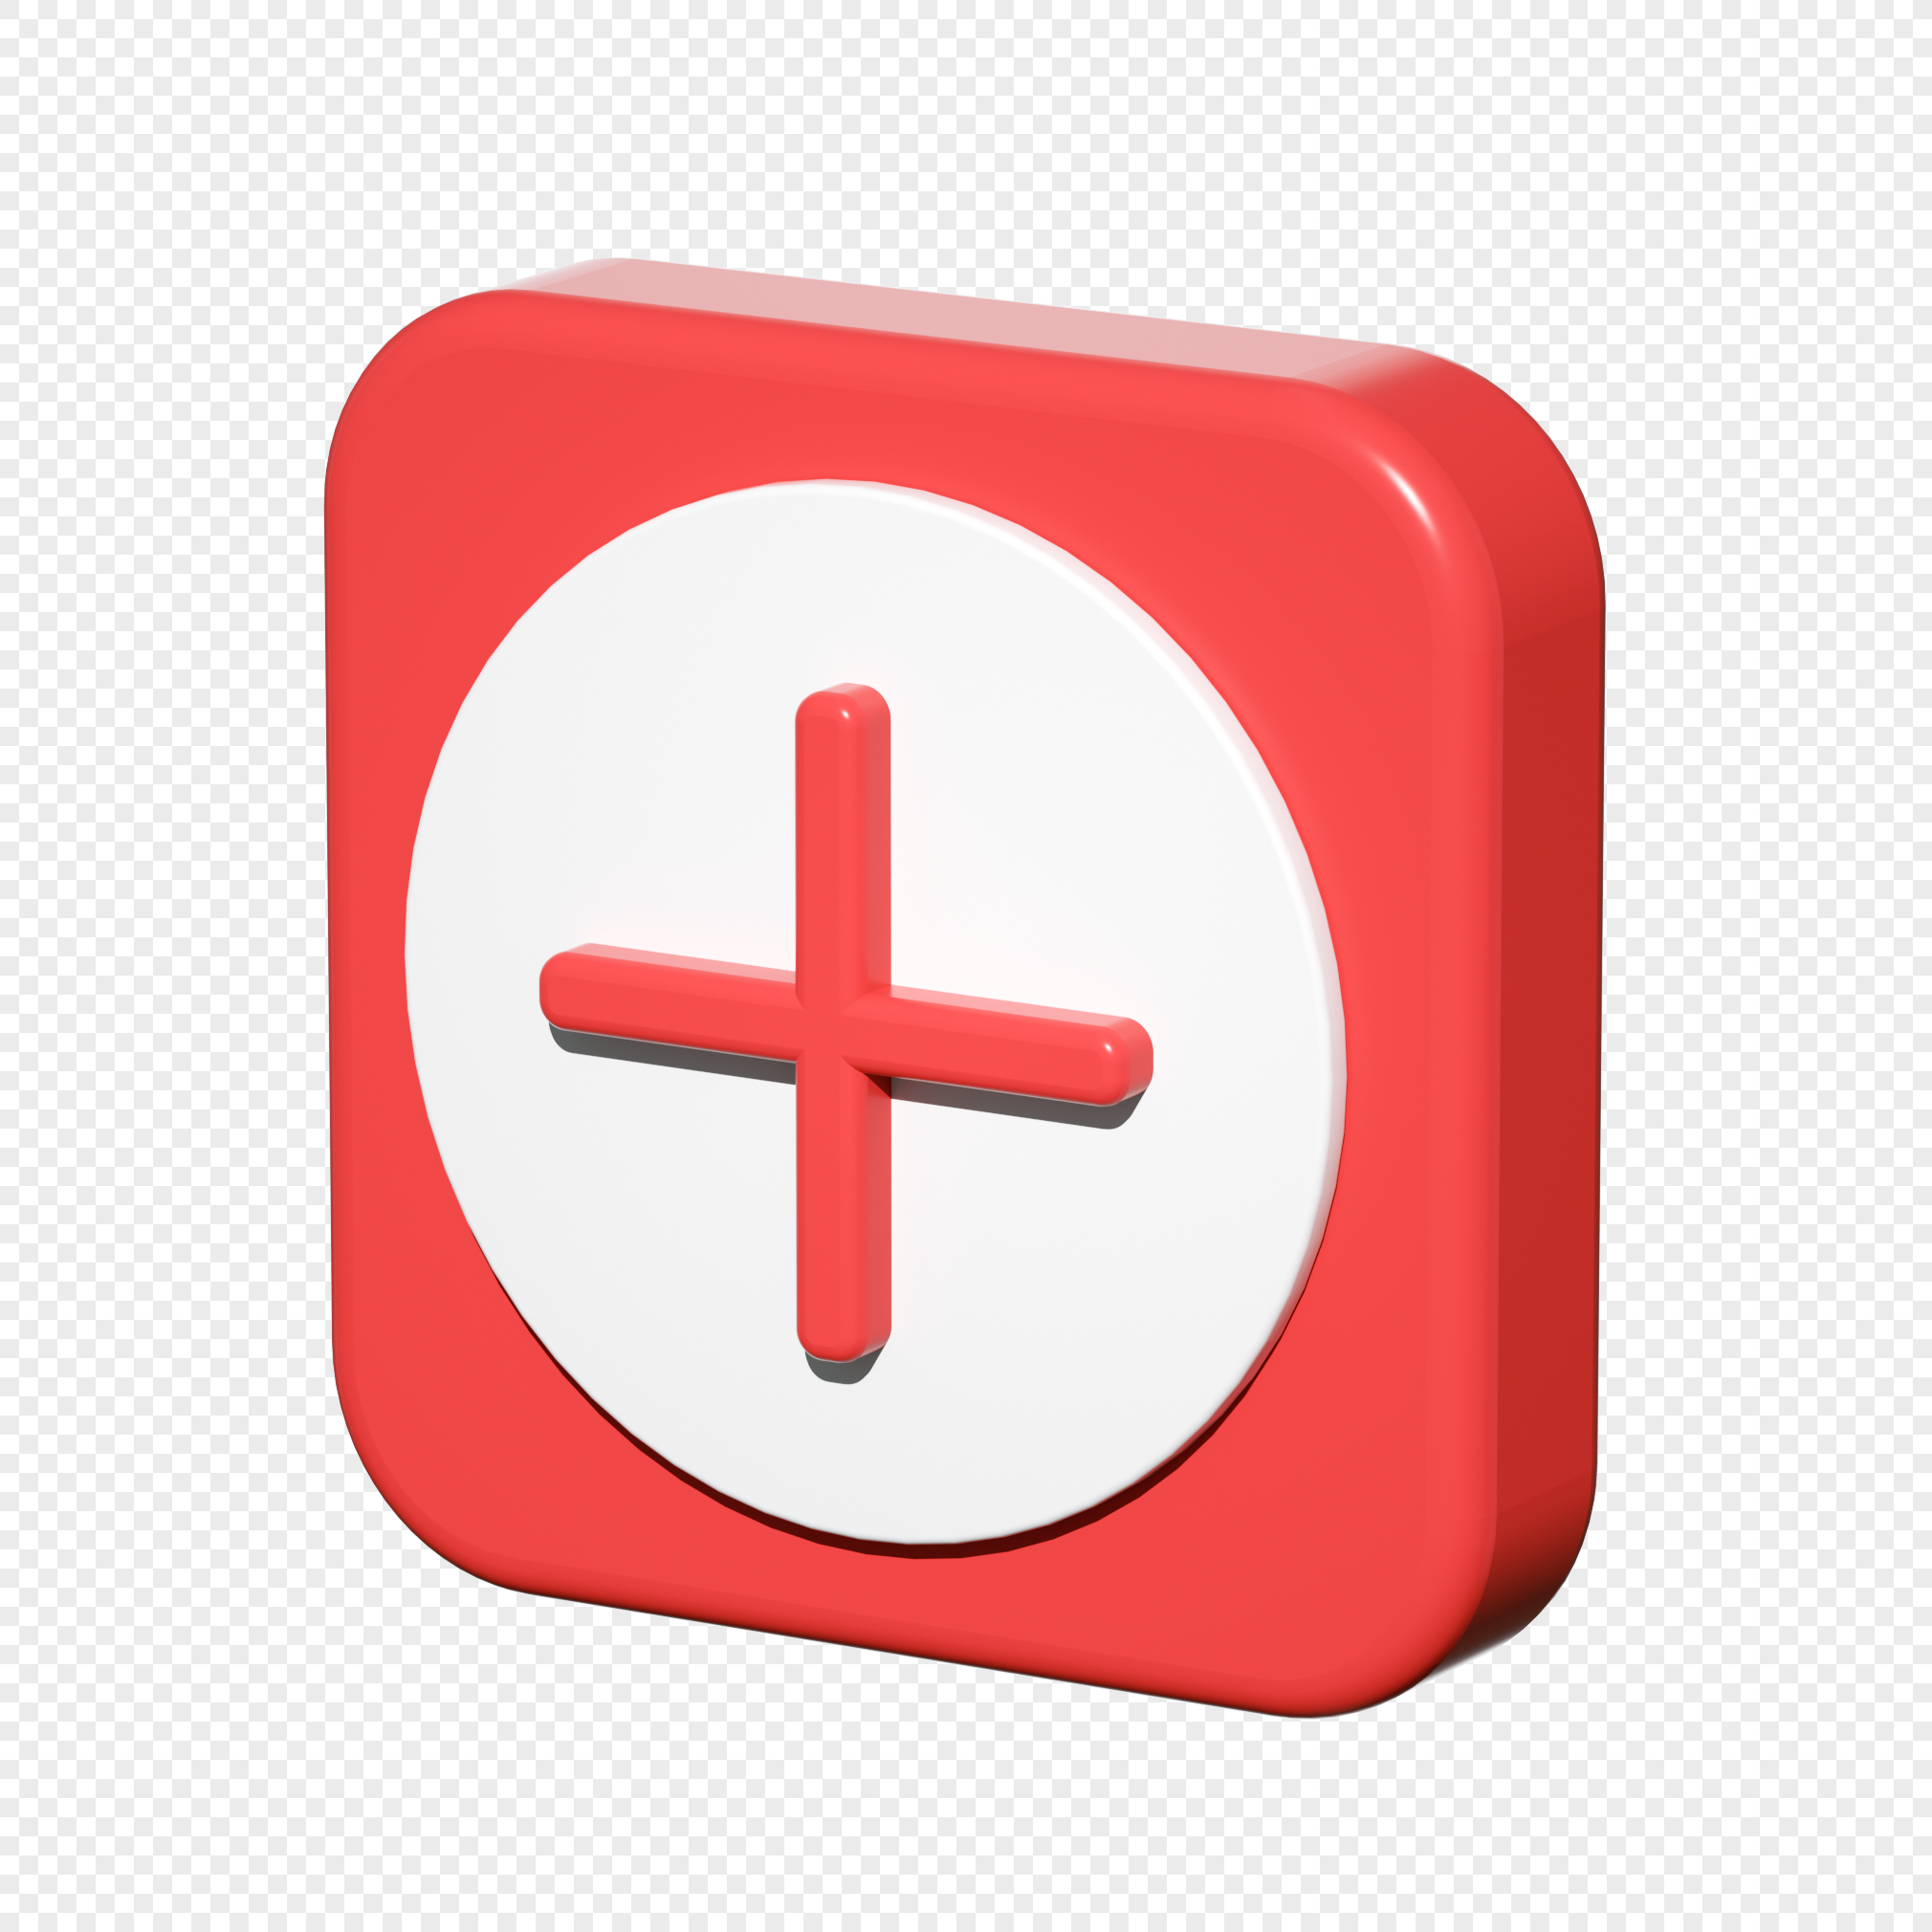 Cross Icon PNG Images With Transparent Background